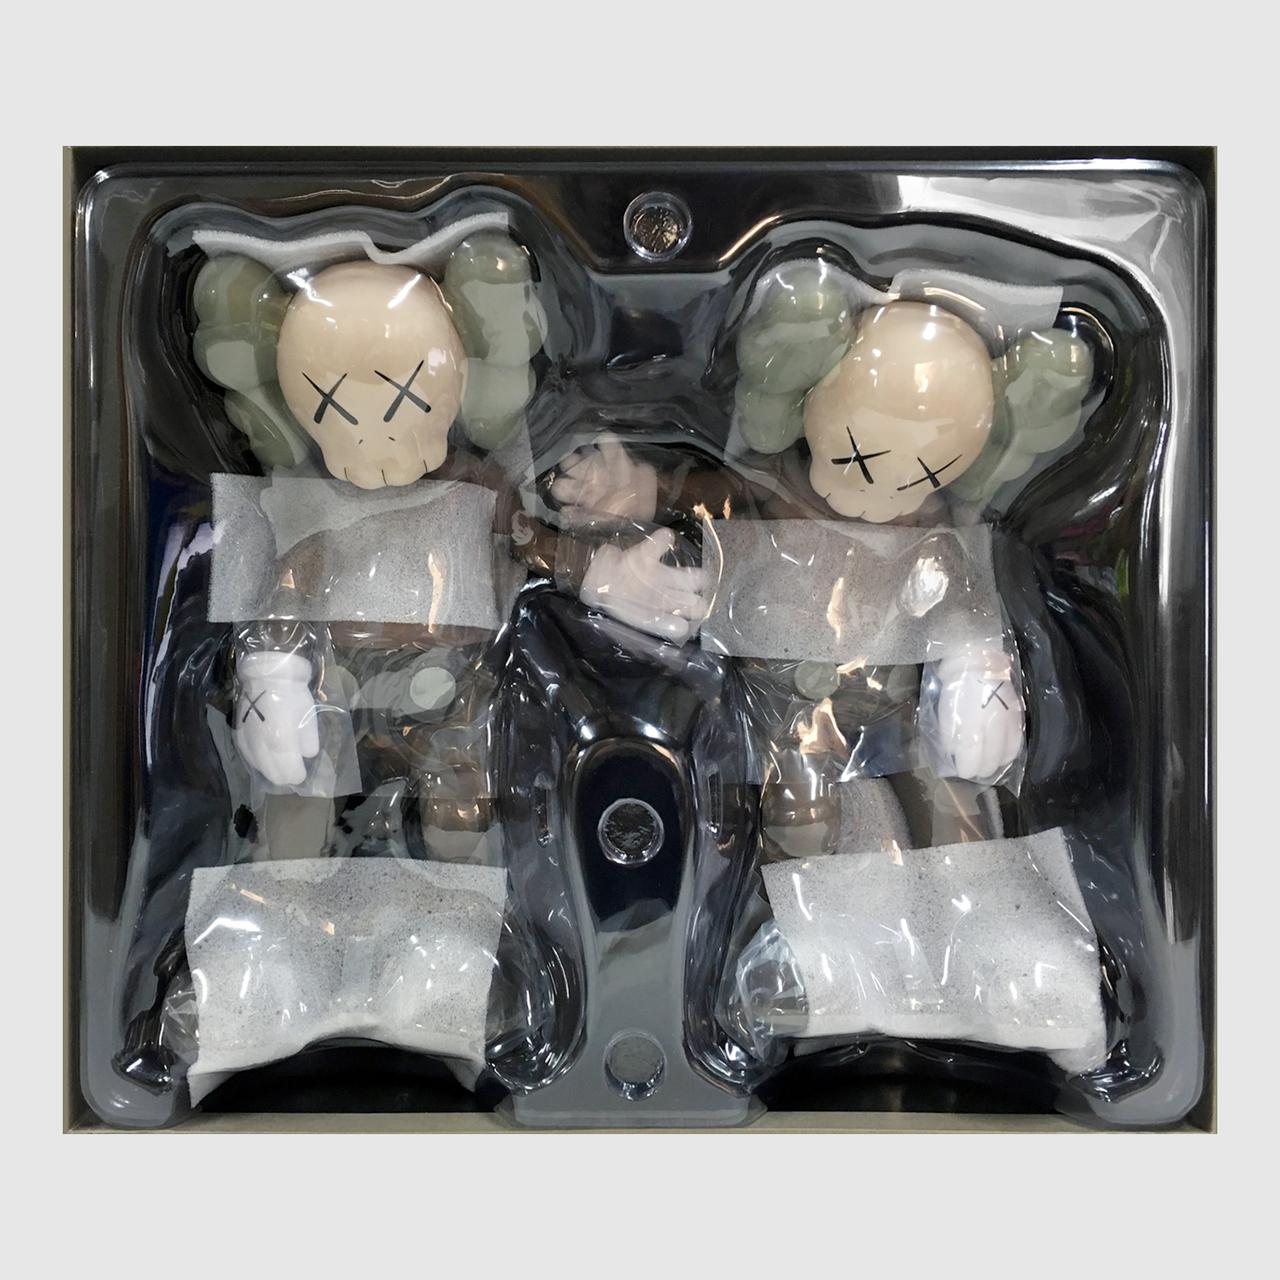 Along the Way (Brown)
Date of creation: 2019
Medium: Sculpture
Media: Vinyl
Edition: Unknown and sold out
Size: 26.7 x 23 x 12.7 cm
Observations: Vinyl sculpture published in 2019 by KAWS/ORIGINALFAKE & Medicom Toys. Sent inside its original box. 